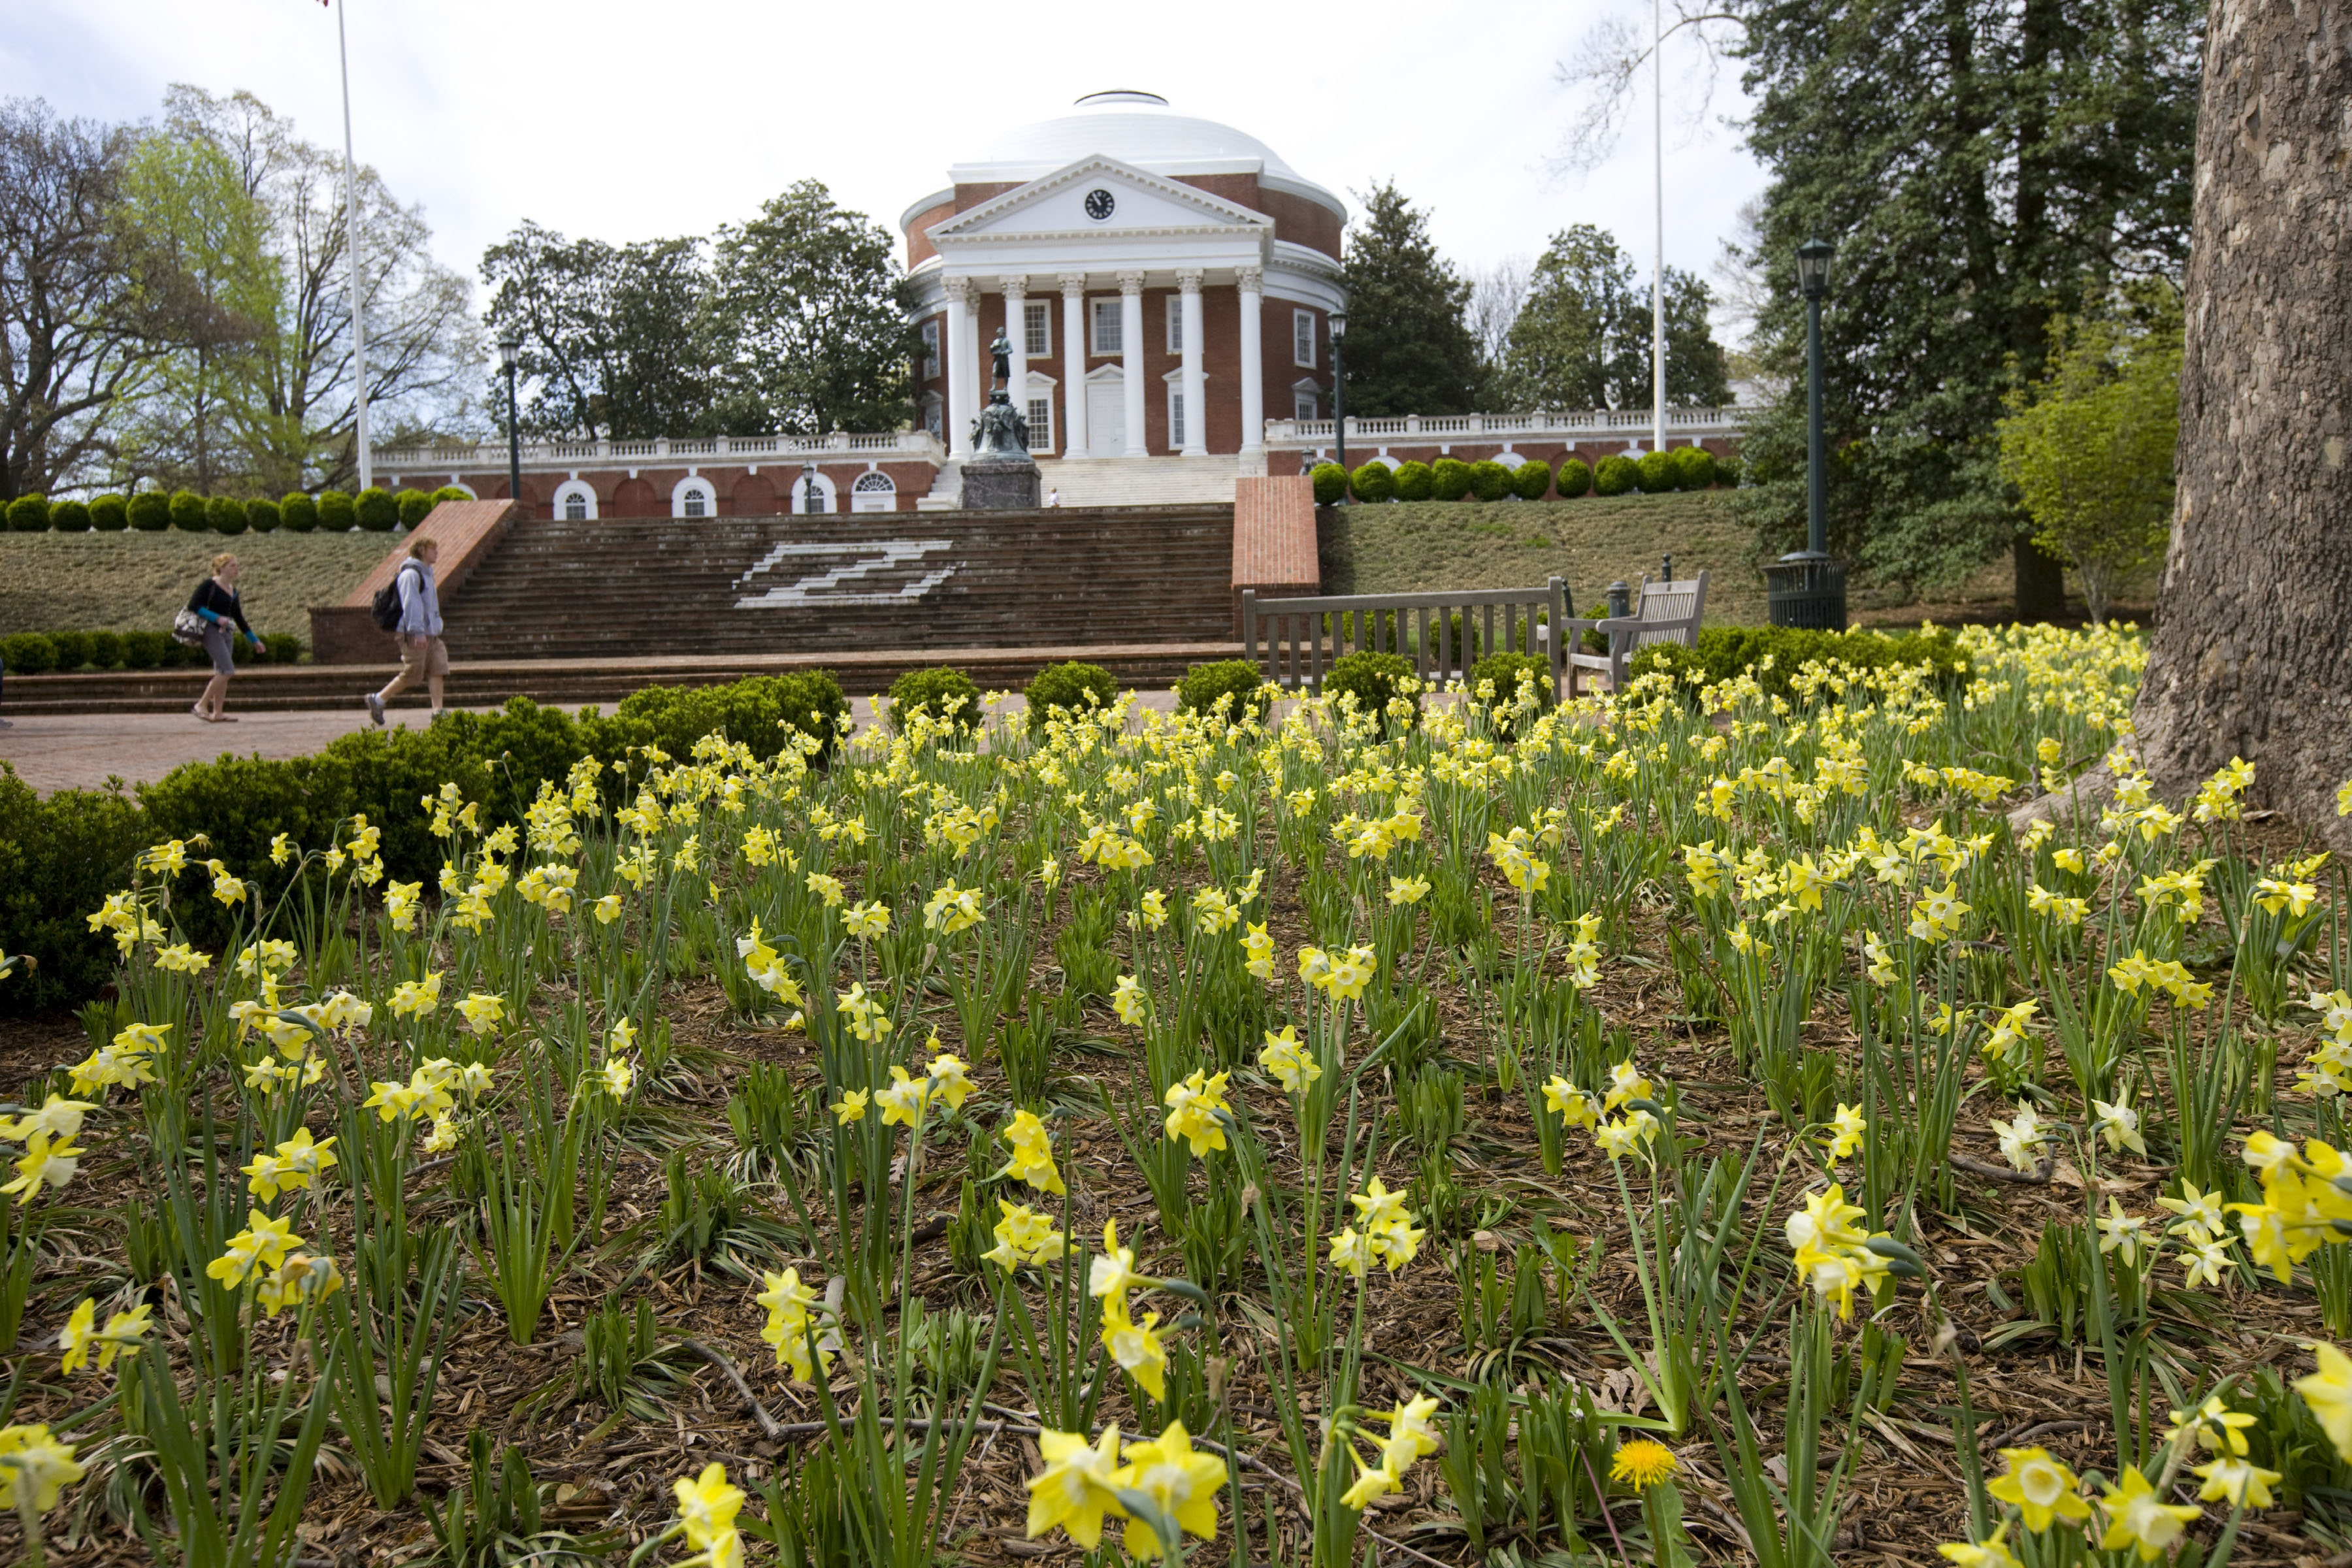 Yellow flowers growing in a flower bed in front of the Rotunda